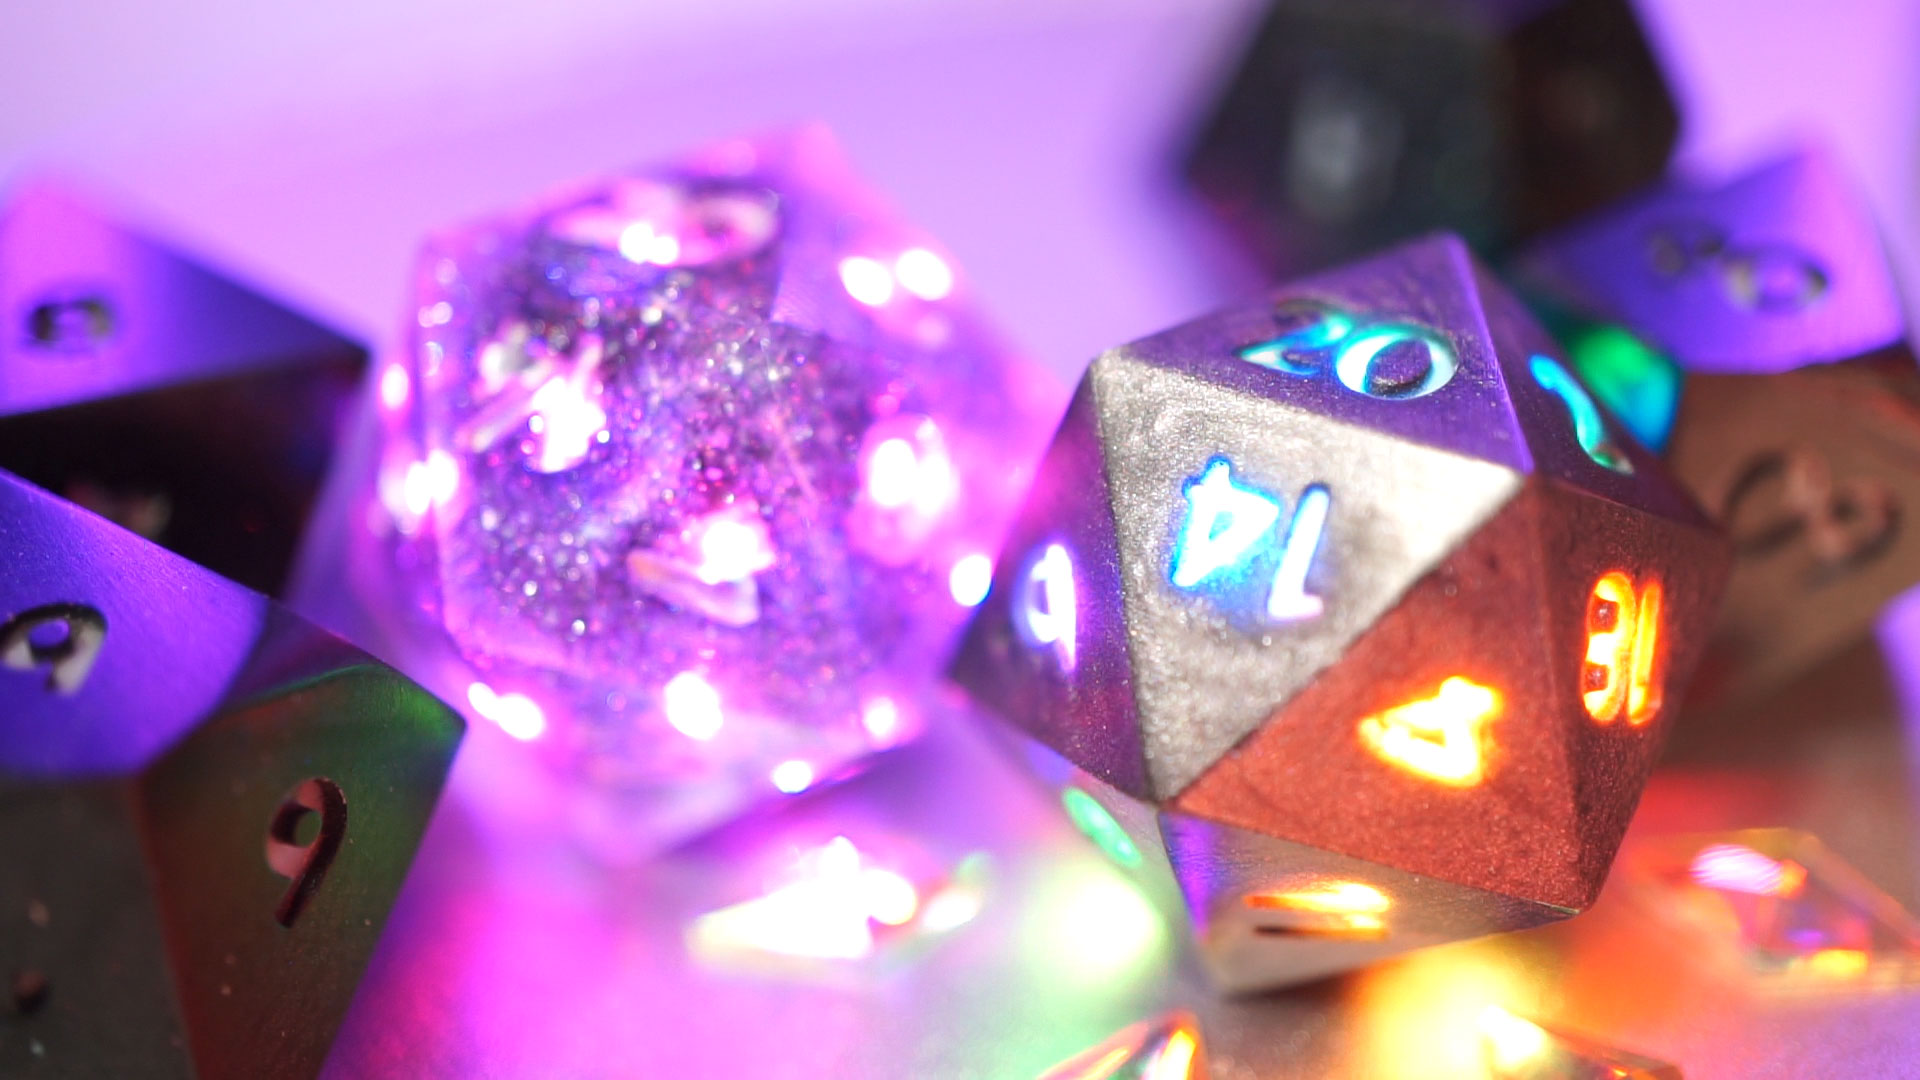 Photograph of multiple dice with two d20s in the center as the focus. One is filled with glitter and has purple colored LEDs lighting up all translucent faces, the other is opaque metallic gray and has different color LEDs lighting up individual numbers on each face.